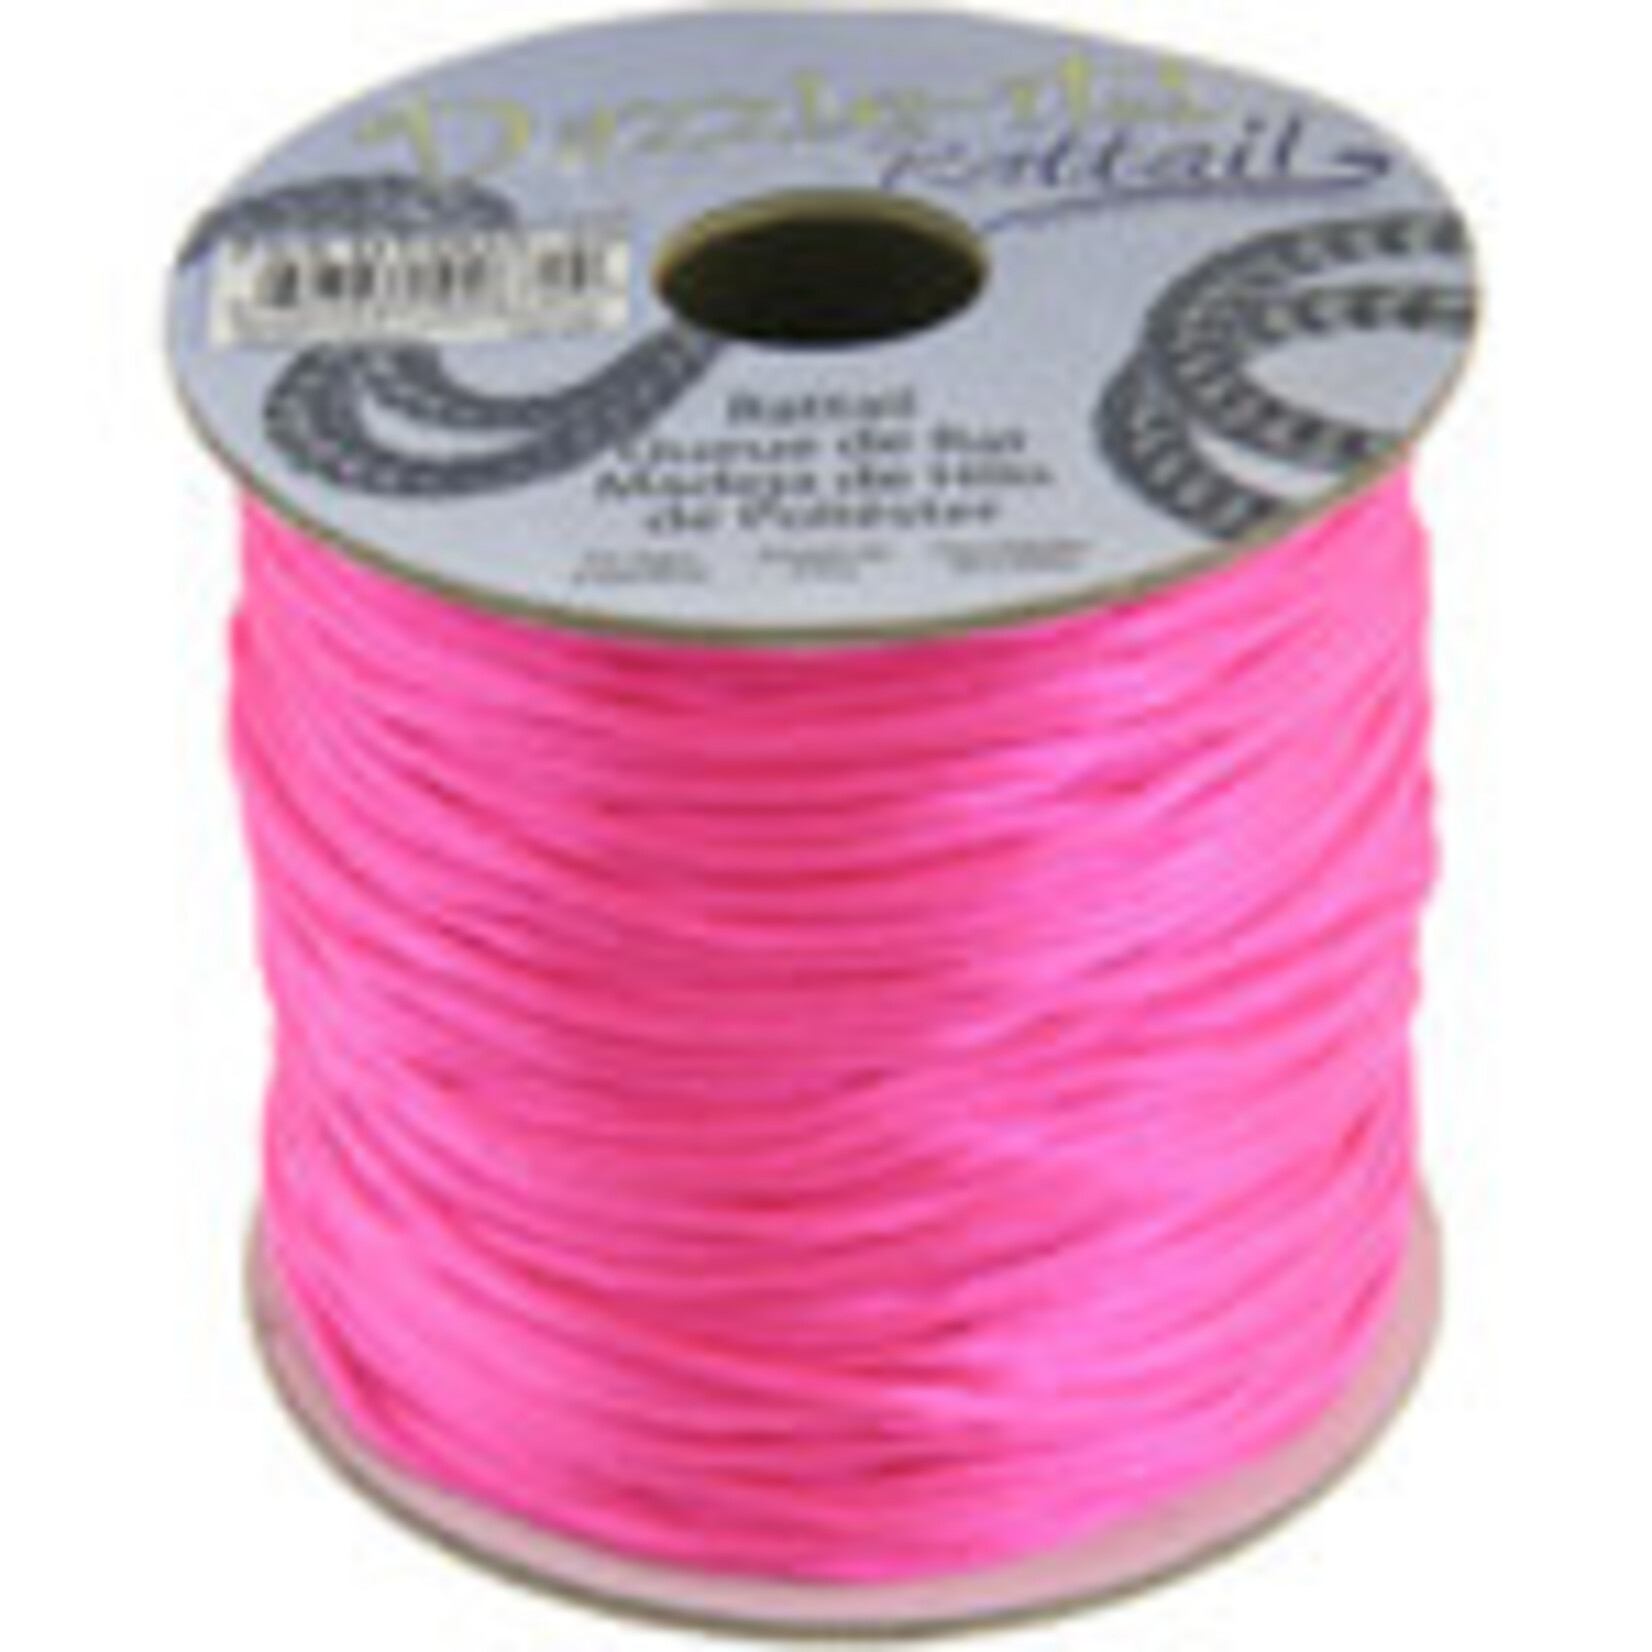 Rattail Cord 1.5mm (100 yards)  Hot Pink